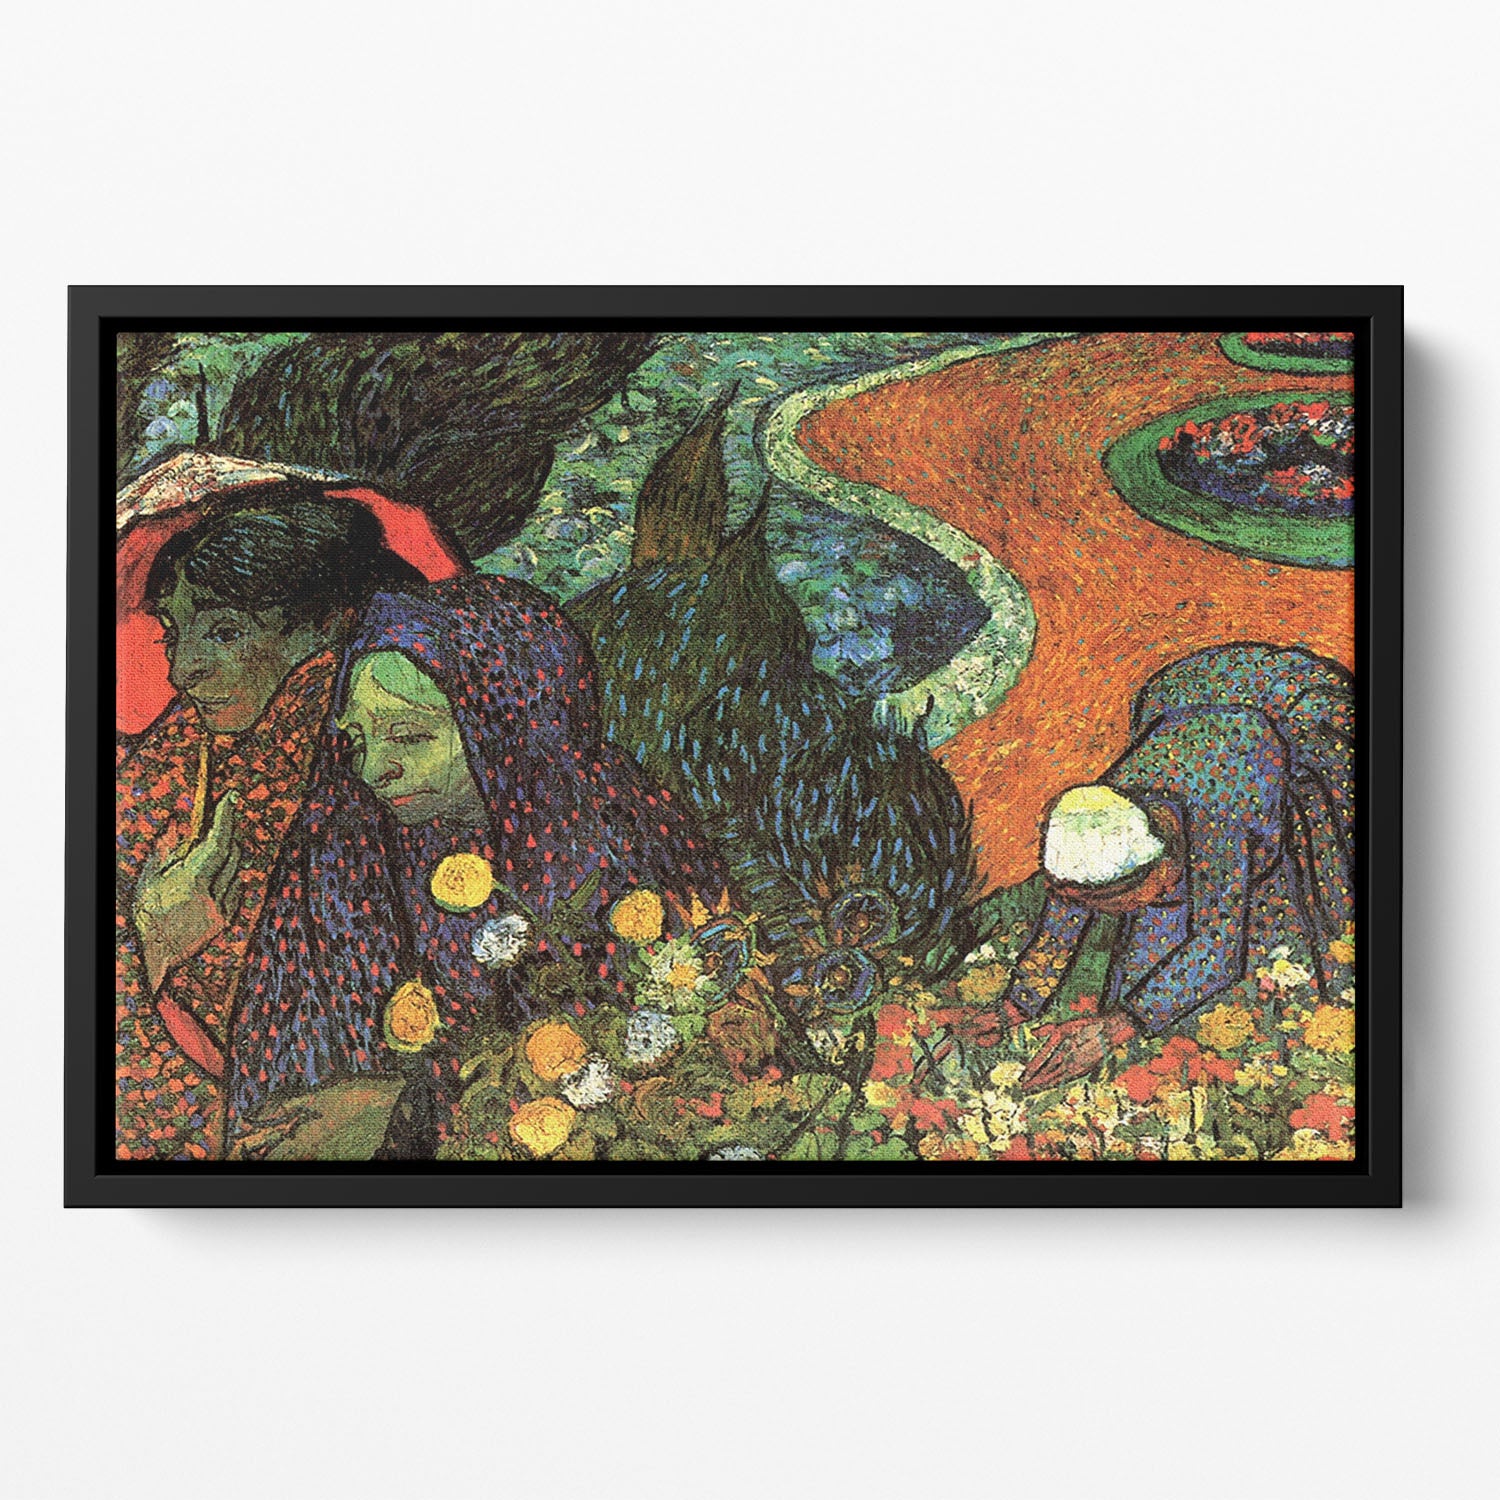 Memory of the Garden at Etten by Van Gogh Floating Framed Canvas